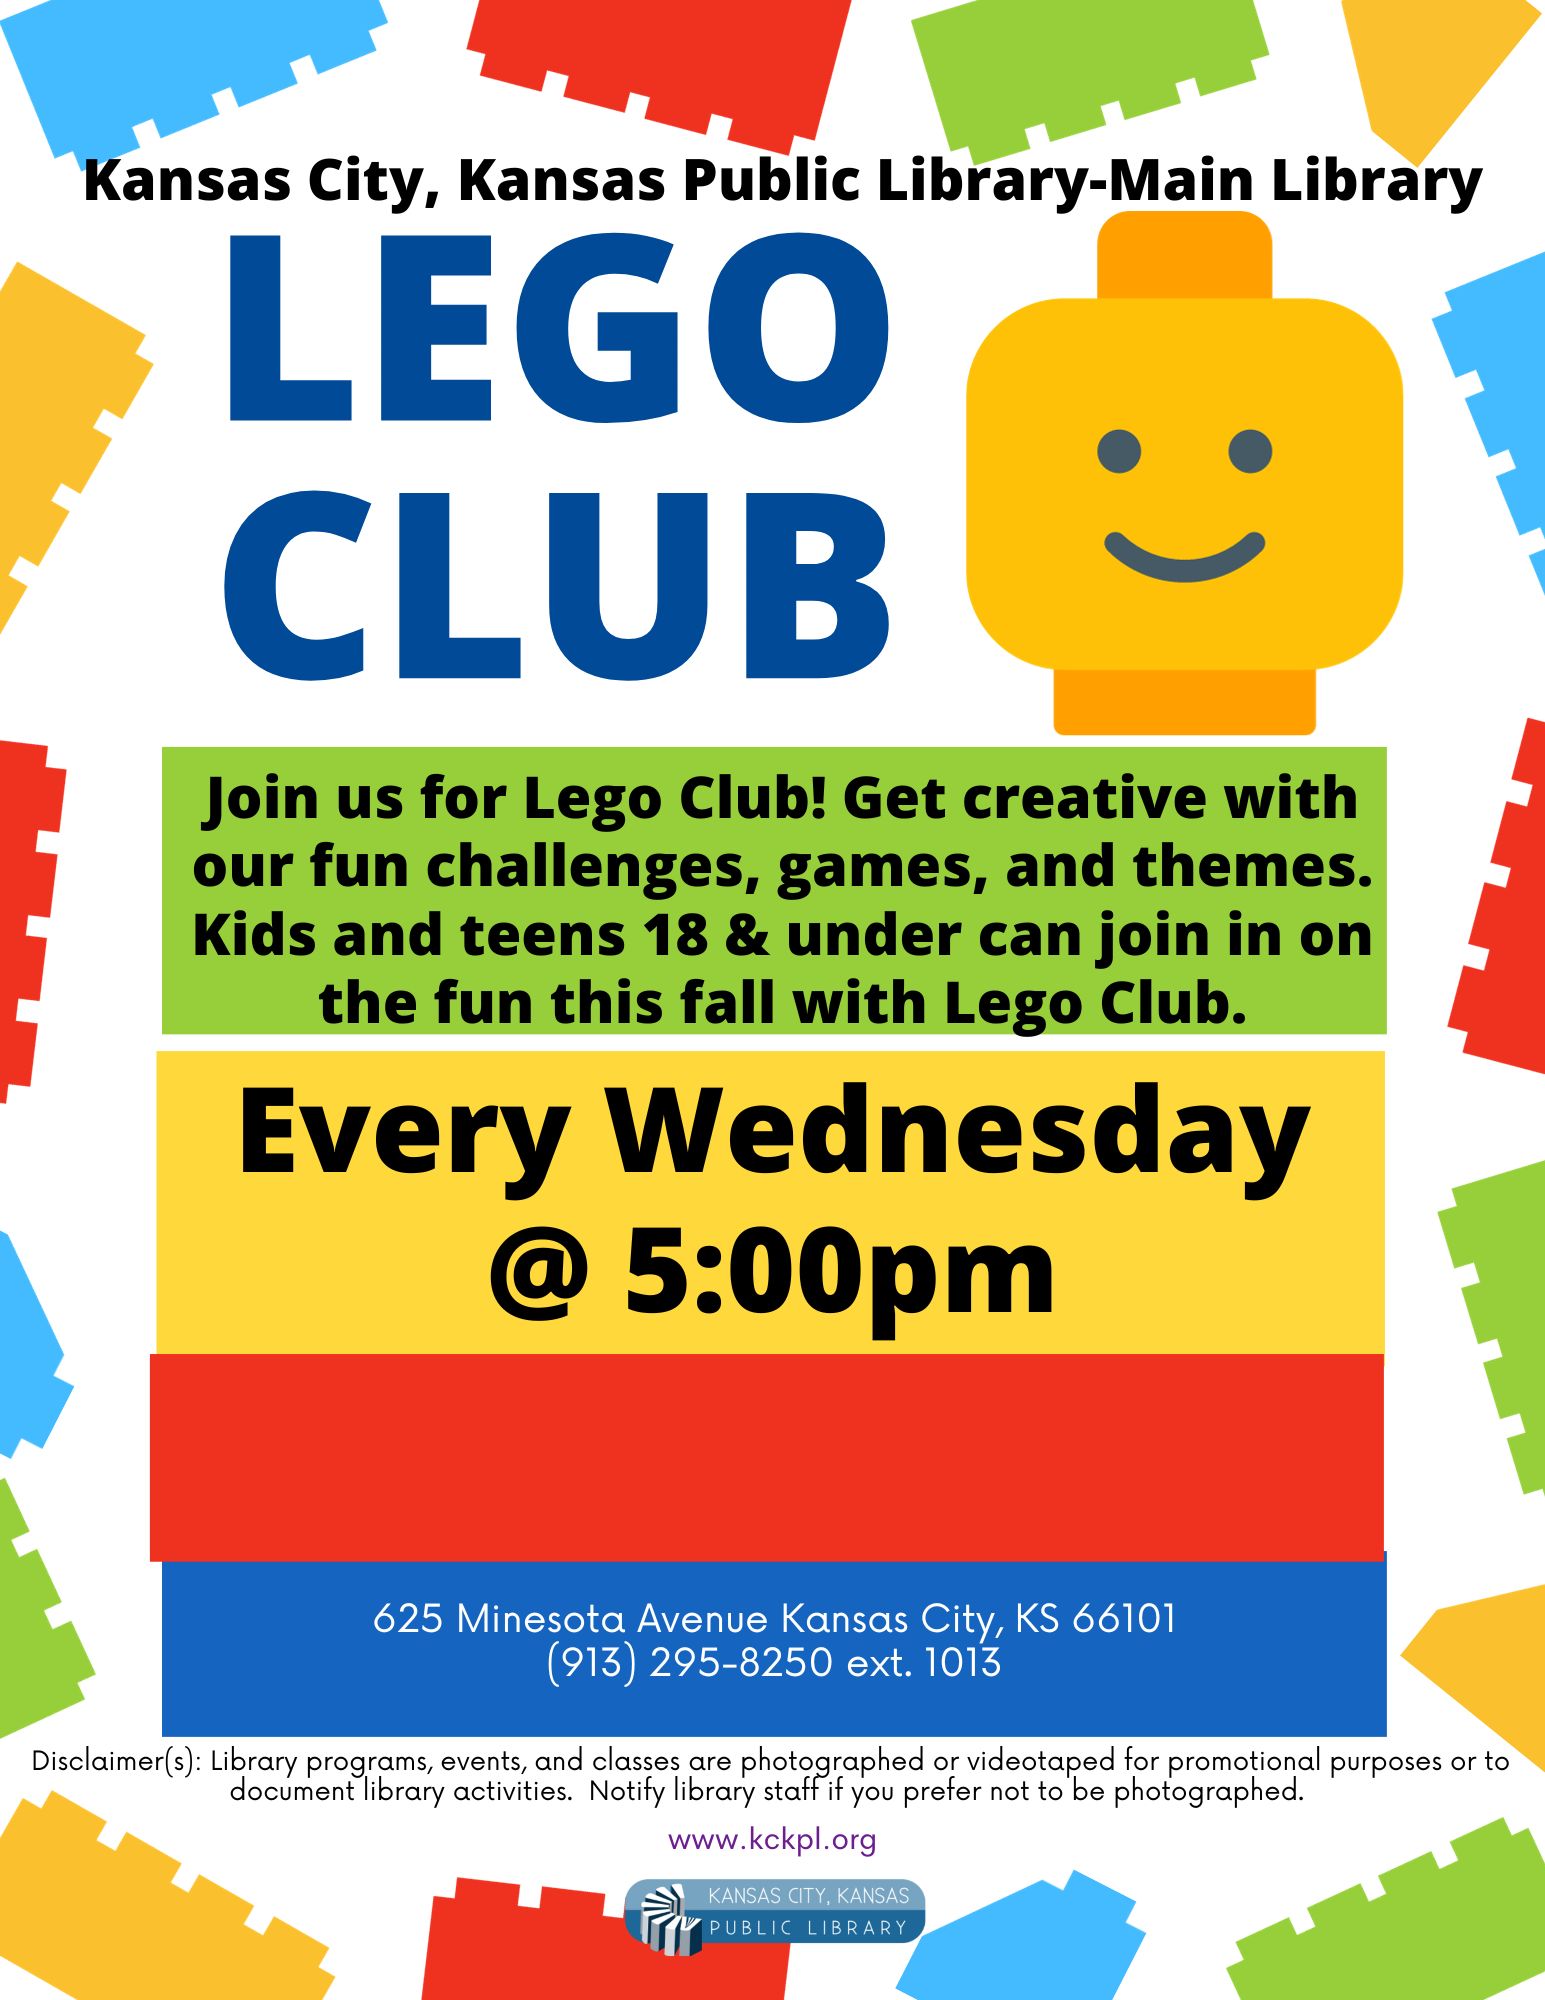 Lego Club flyer for Main Library.